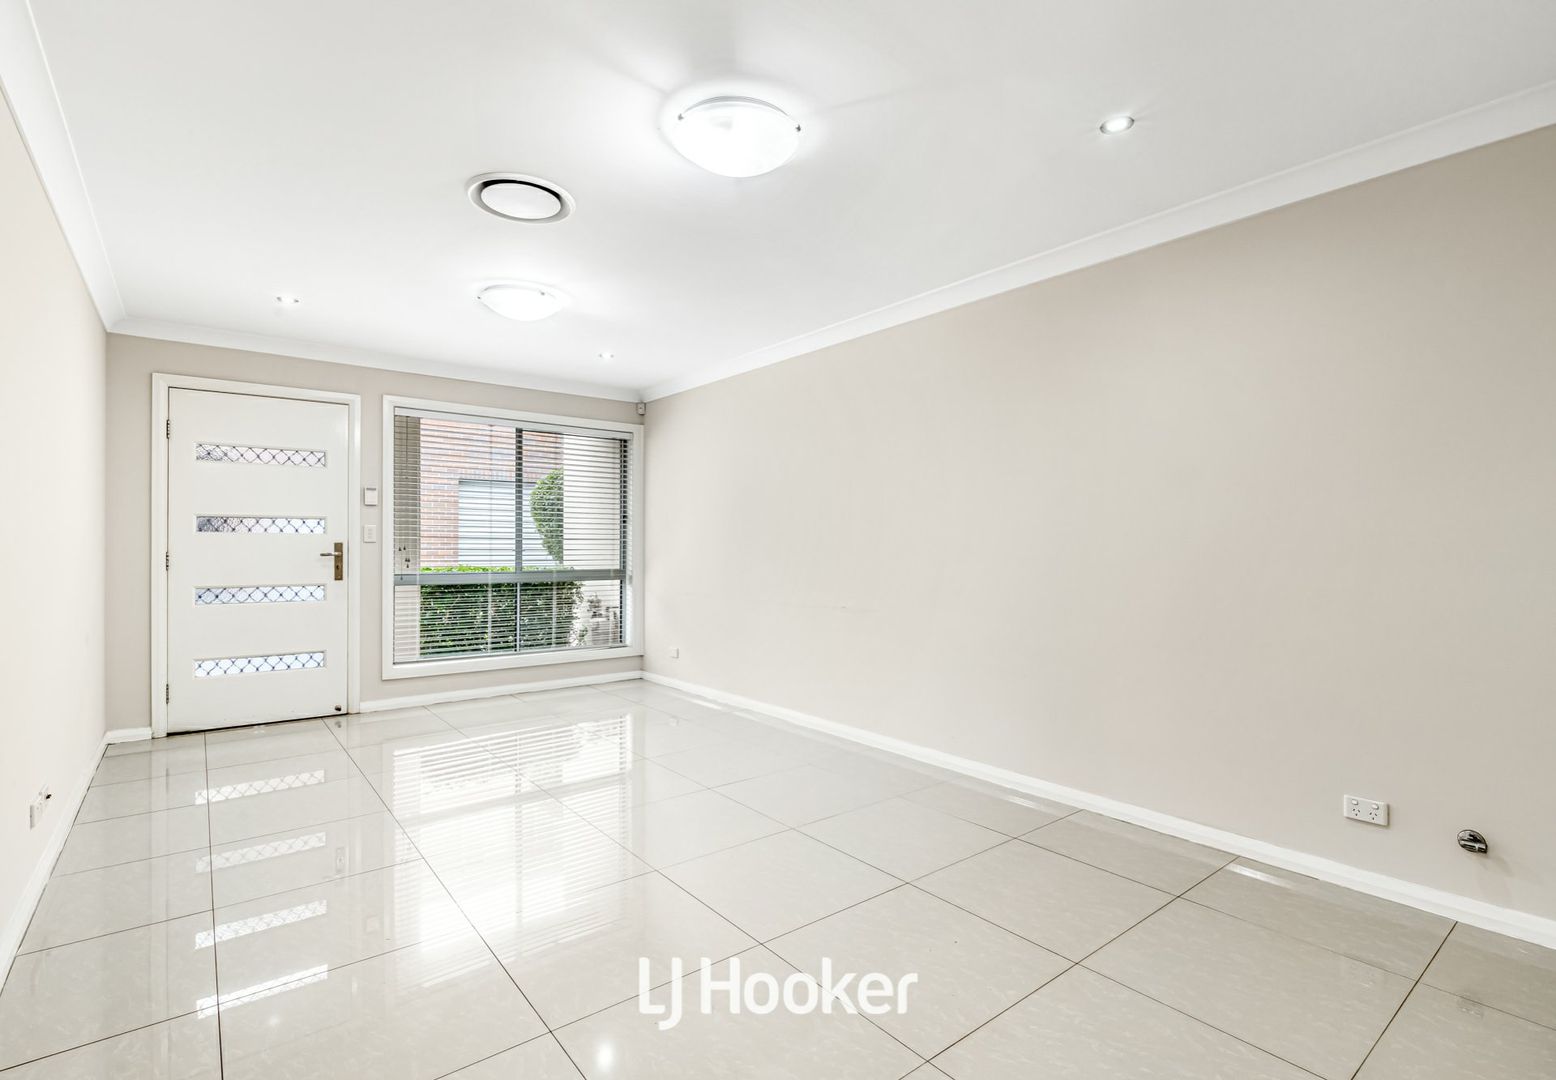 20/570 Sunnyholt Road, Stanhope Gardens NSW 2768, Image 1